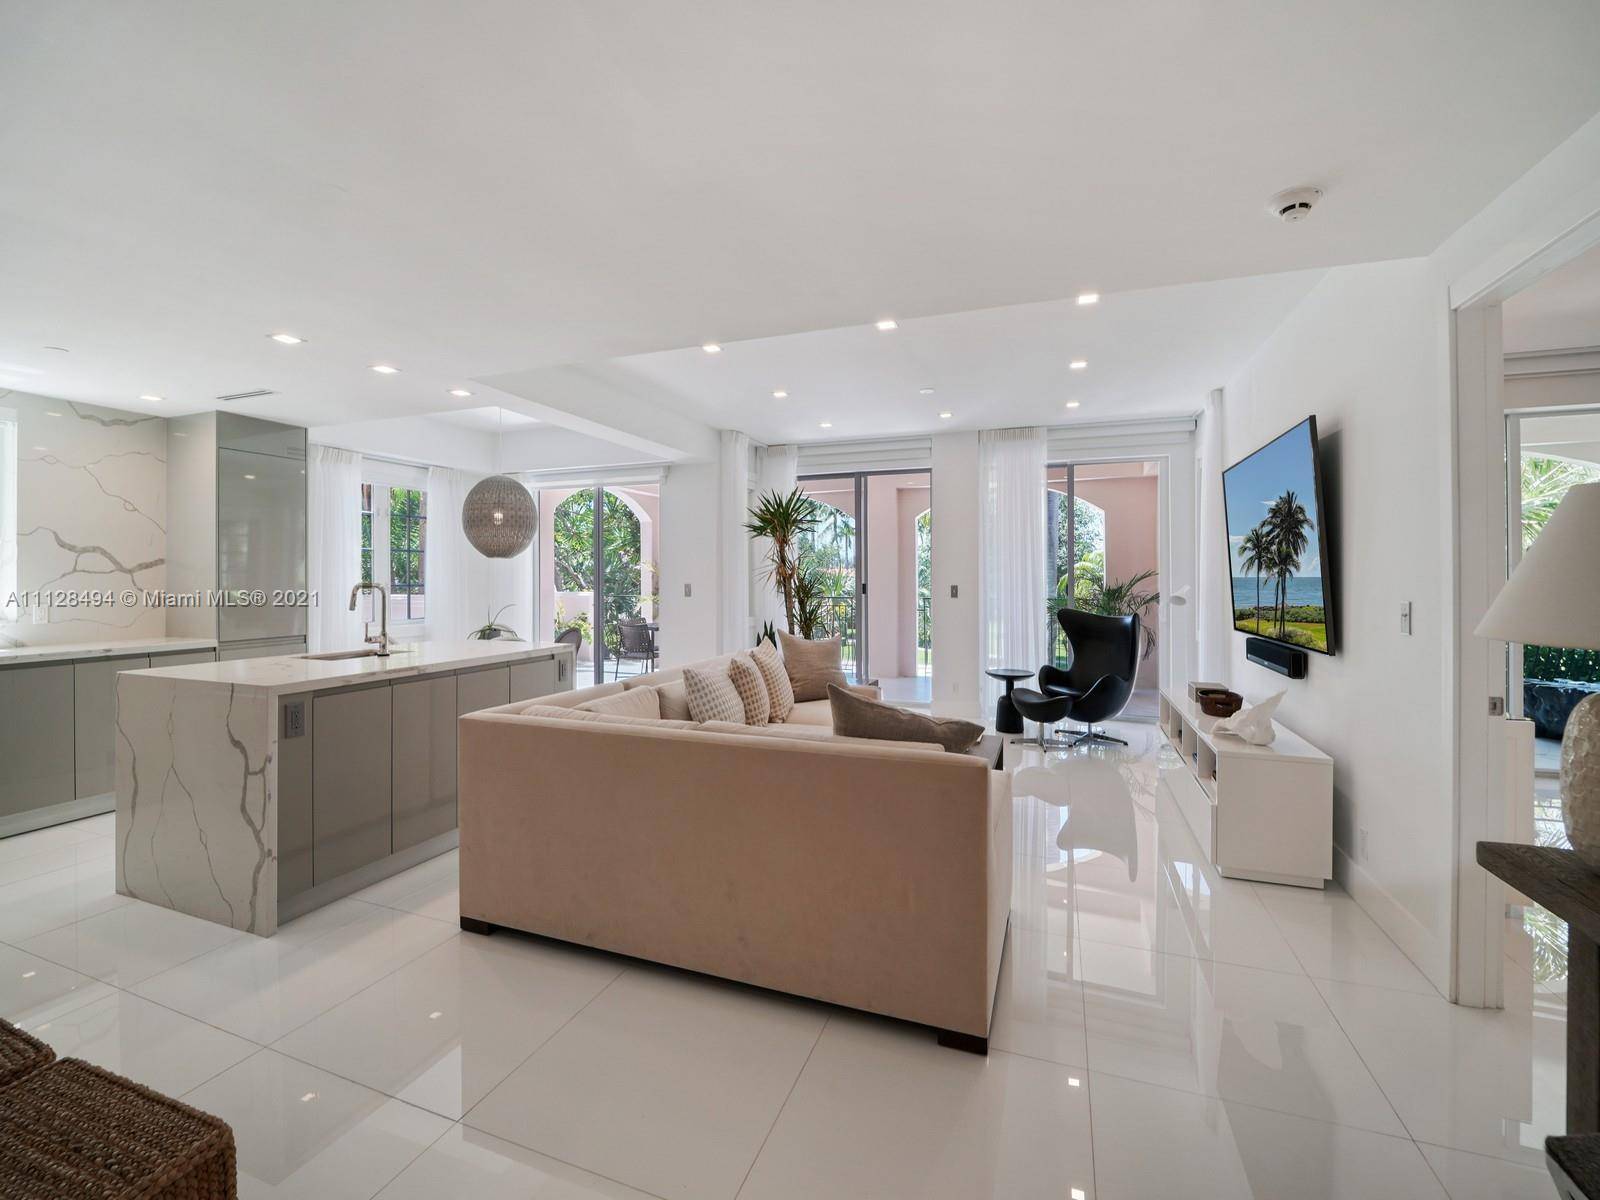 Beautifully renovated and reconfigured to perfection in chic white décor and top of the line finishes.